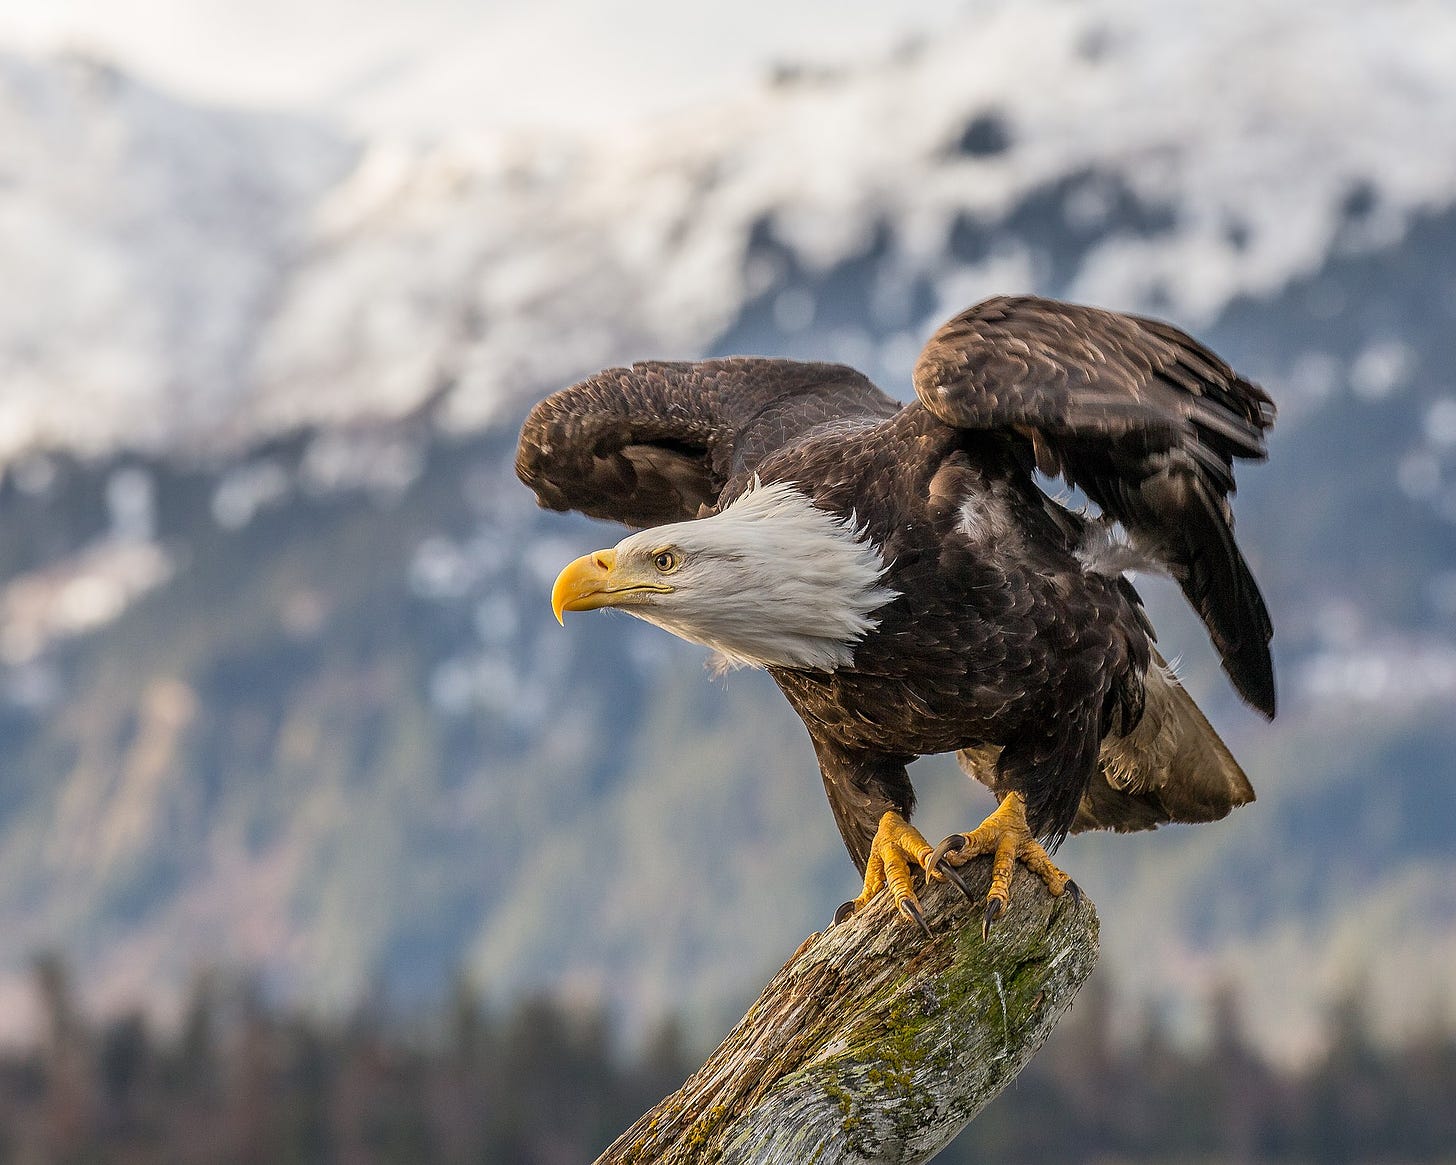 A bald eagle perches on a tree branch, and appears to be about to take off.